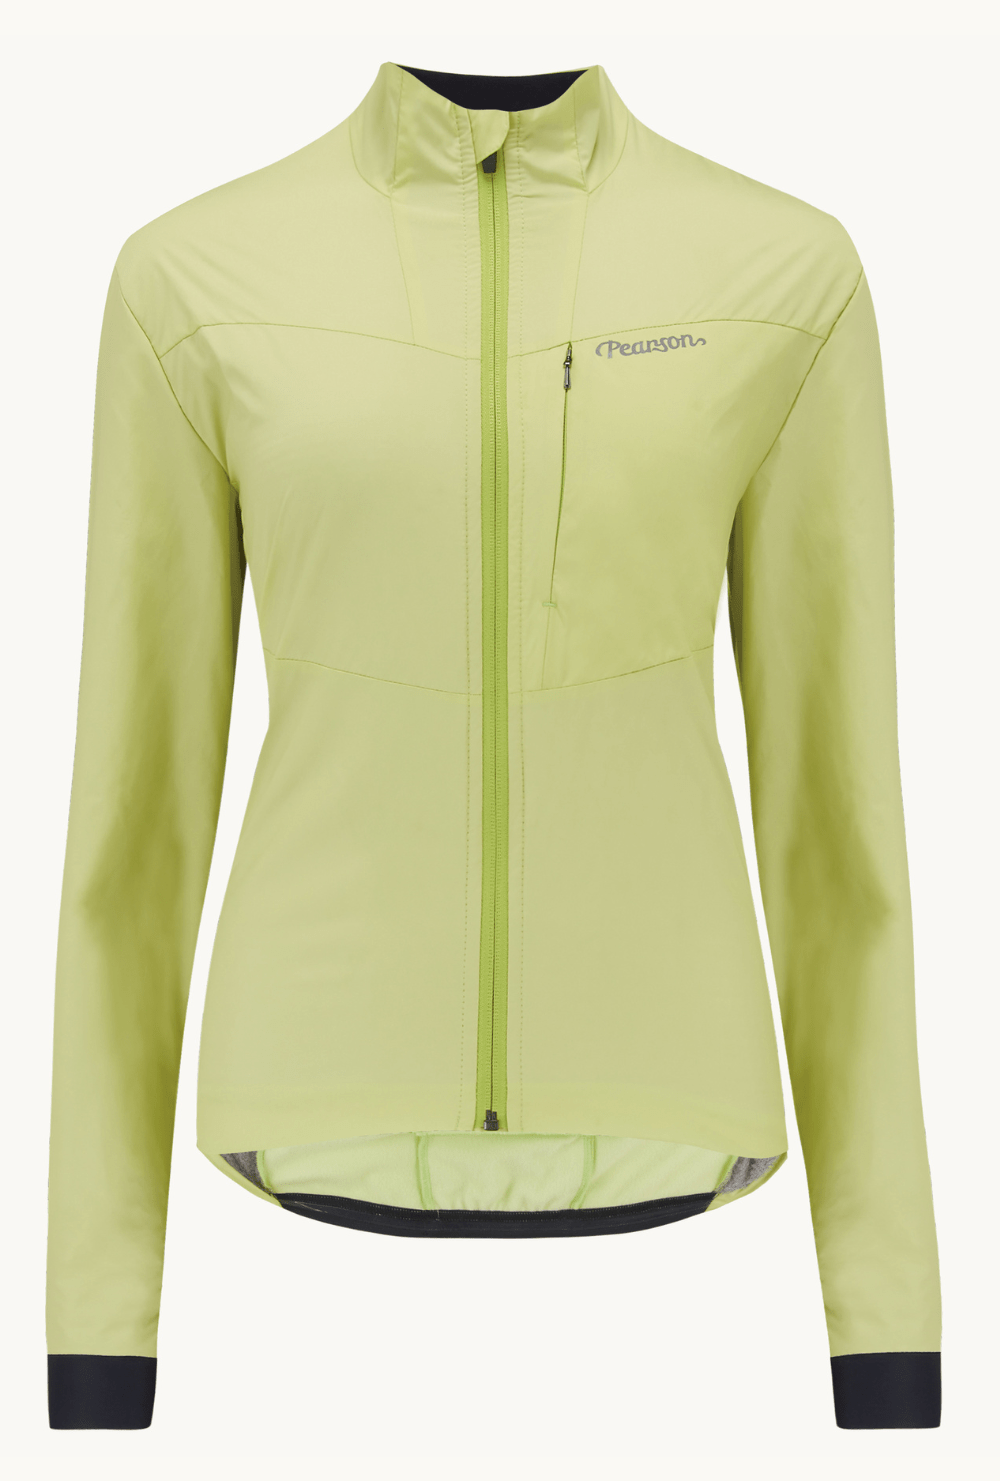 Pearson 1860  Test Your Mettle - Womens Road Insulated Jacket Shadow Lime  Shadow Lime / X-small